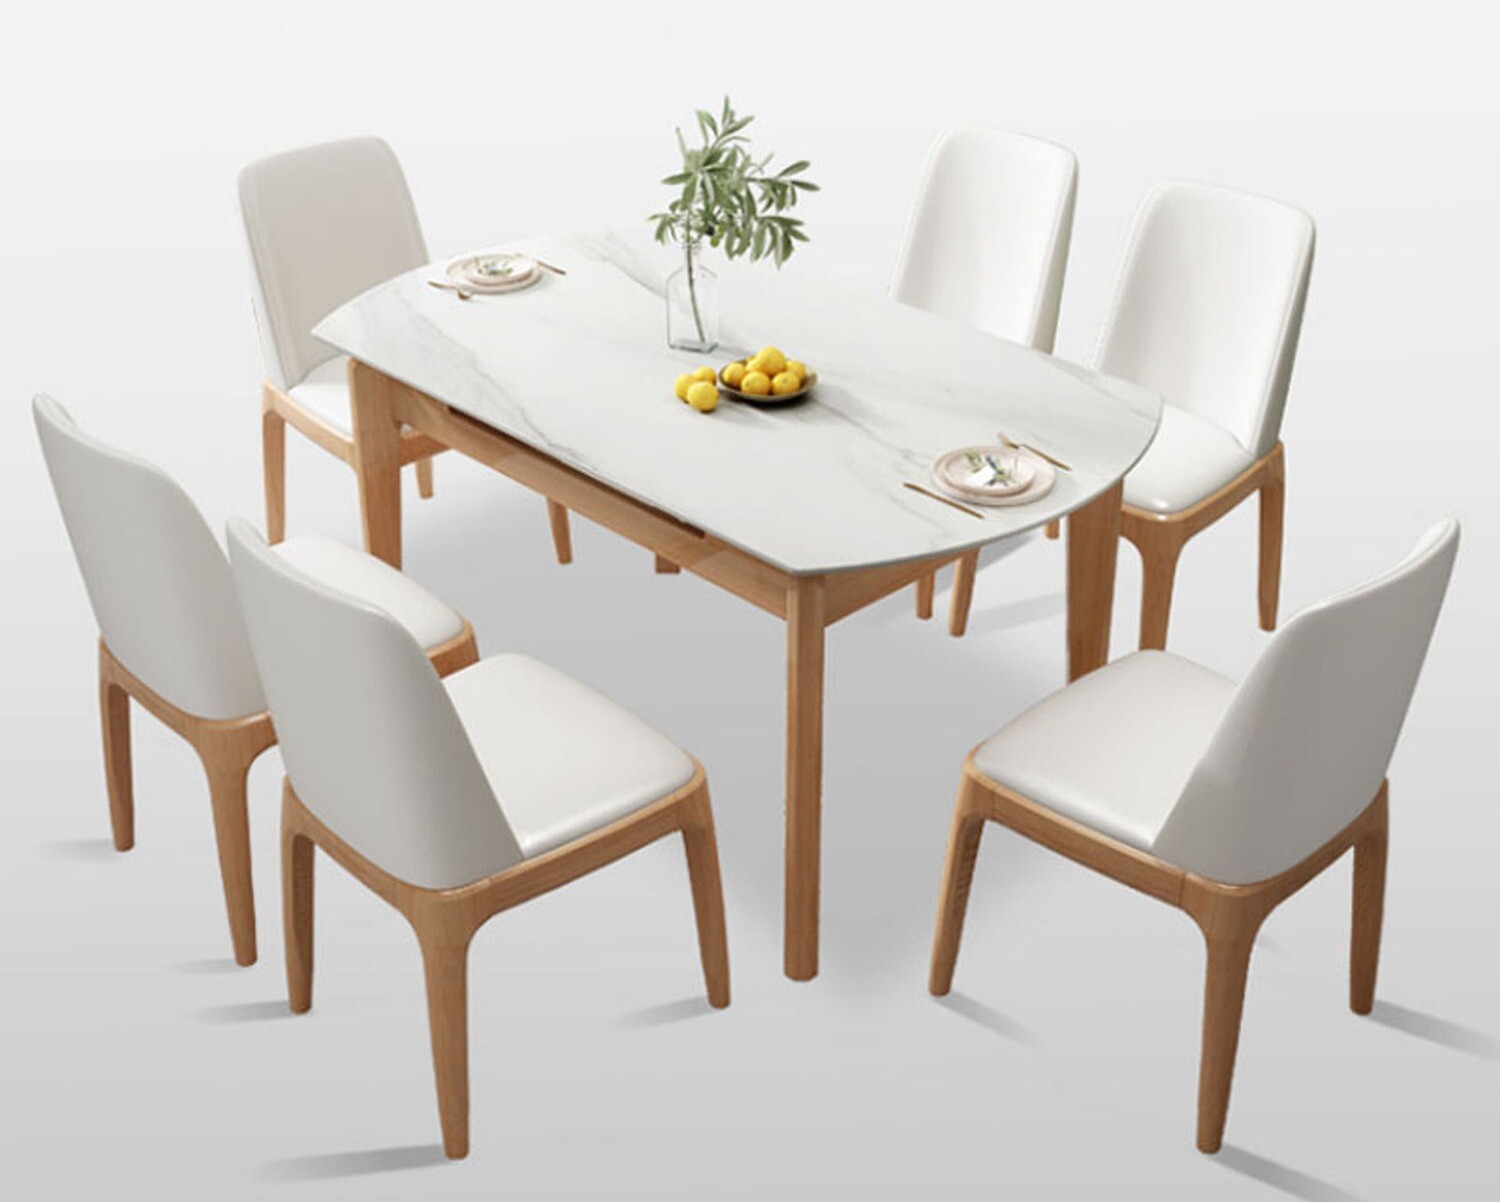 Ofix Savanna Solid Thailand Rubberwood Dining Set (Convertible Table: Round to Rectangular Table) (Dining Table+4 Dining Chair) (135*85/ 135Diameter)